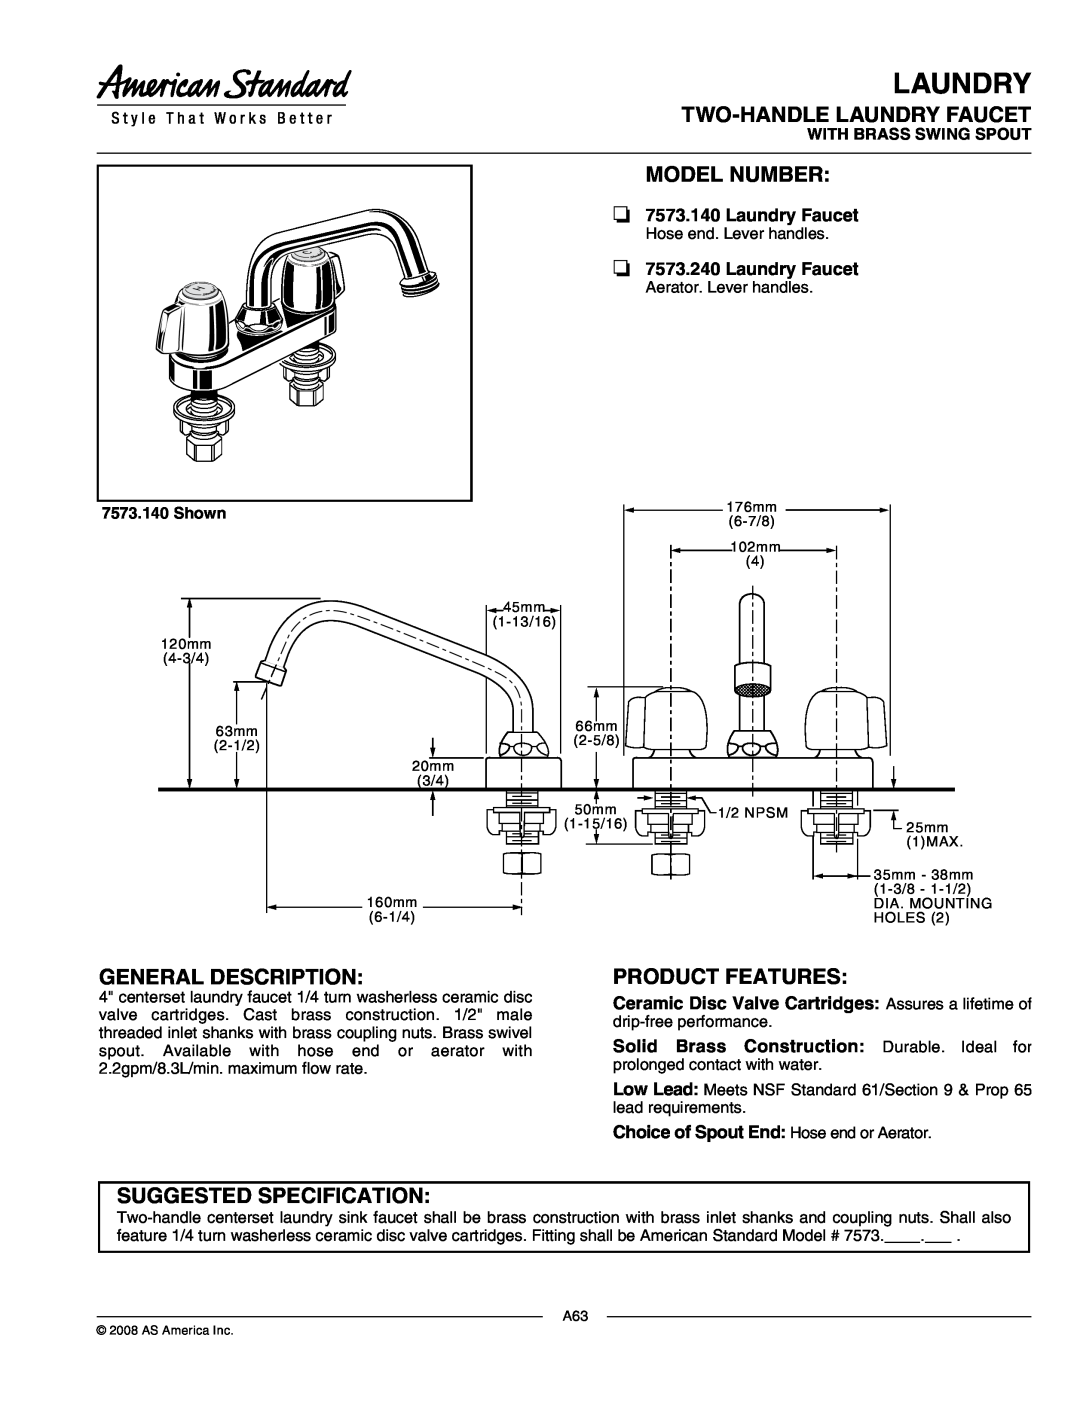 American Standard 7573.240 manual Laundry, Two-Handlelaundry Faucet, Model Number, General Description, Product Features 